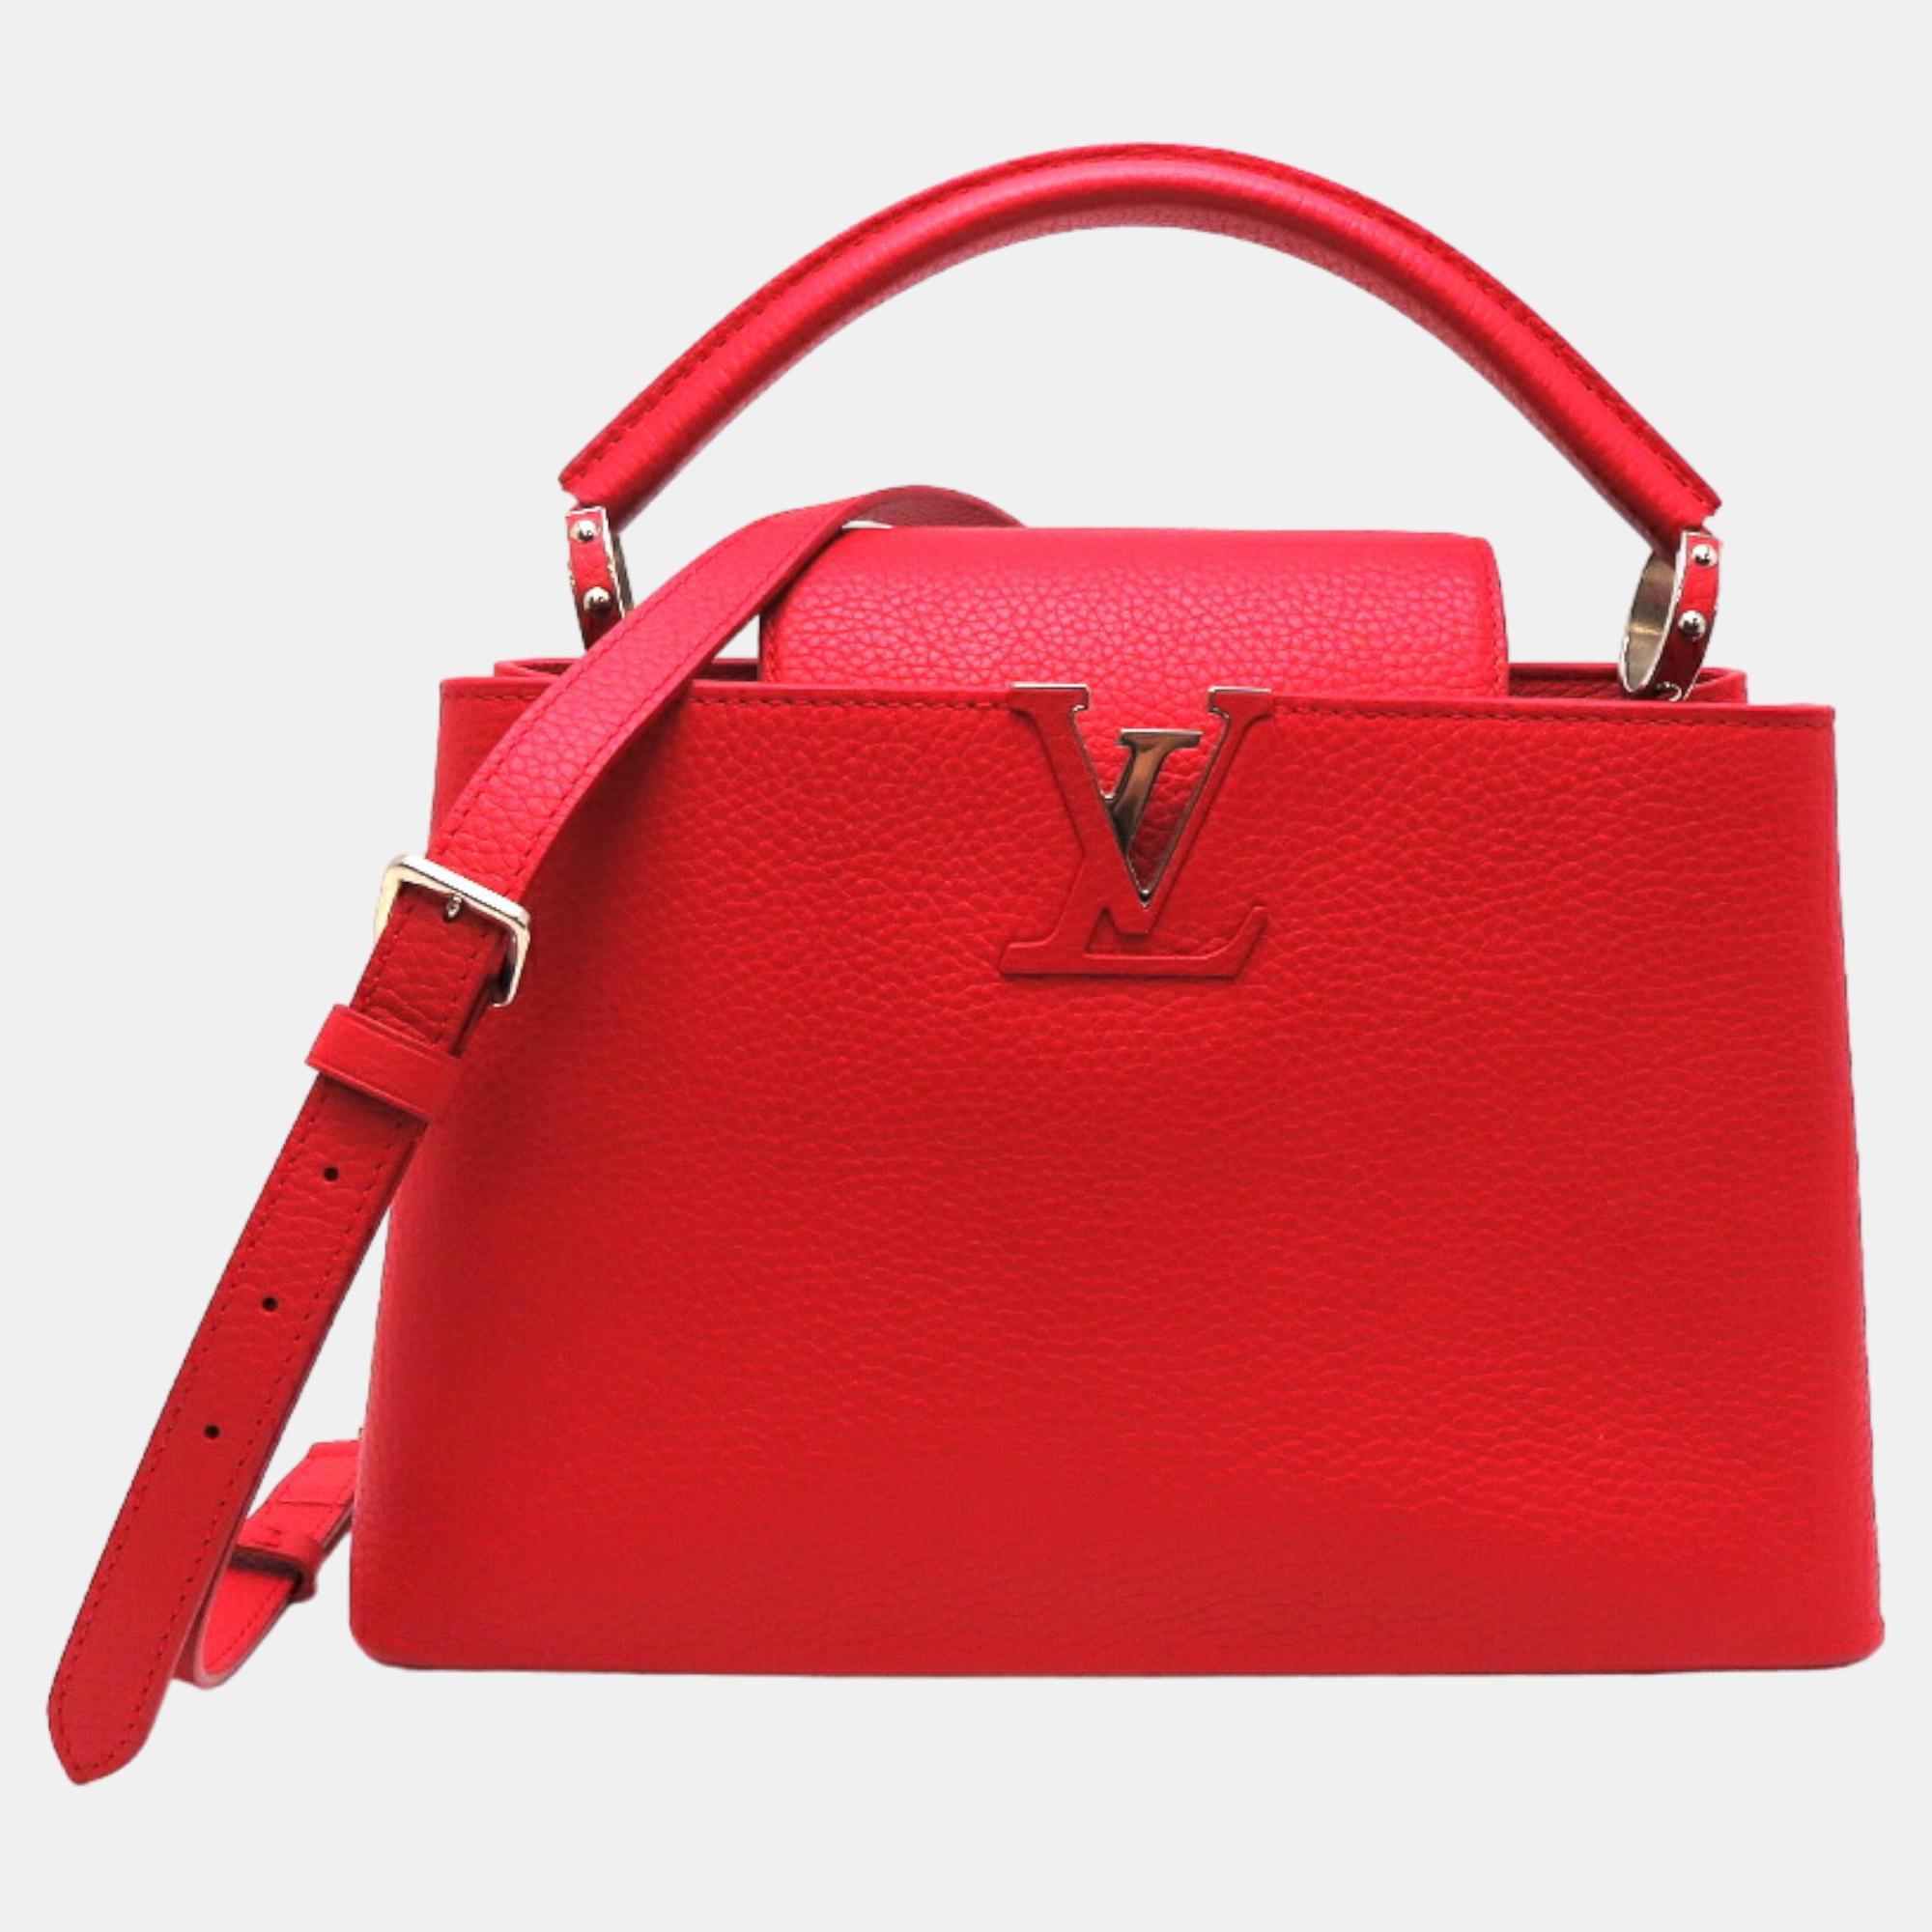 Pre-owned Louis Vuitton Red Leather Taurillon Capucines Pm Handbag